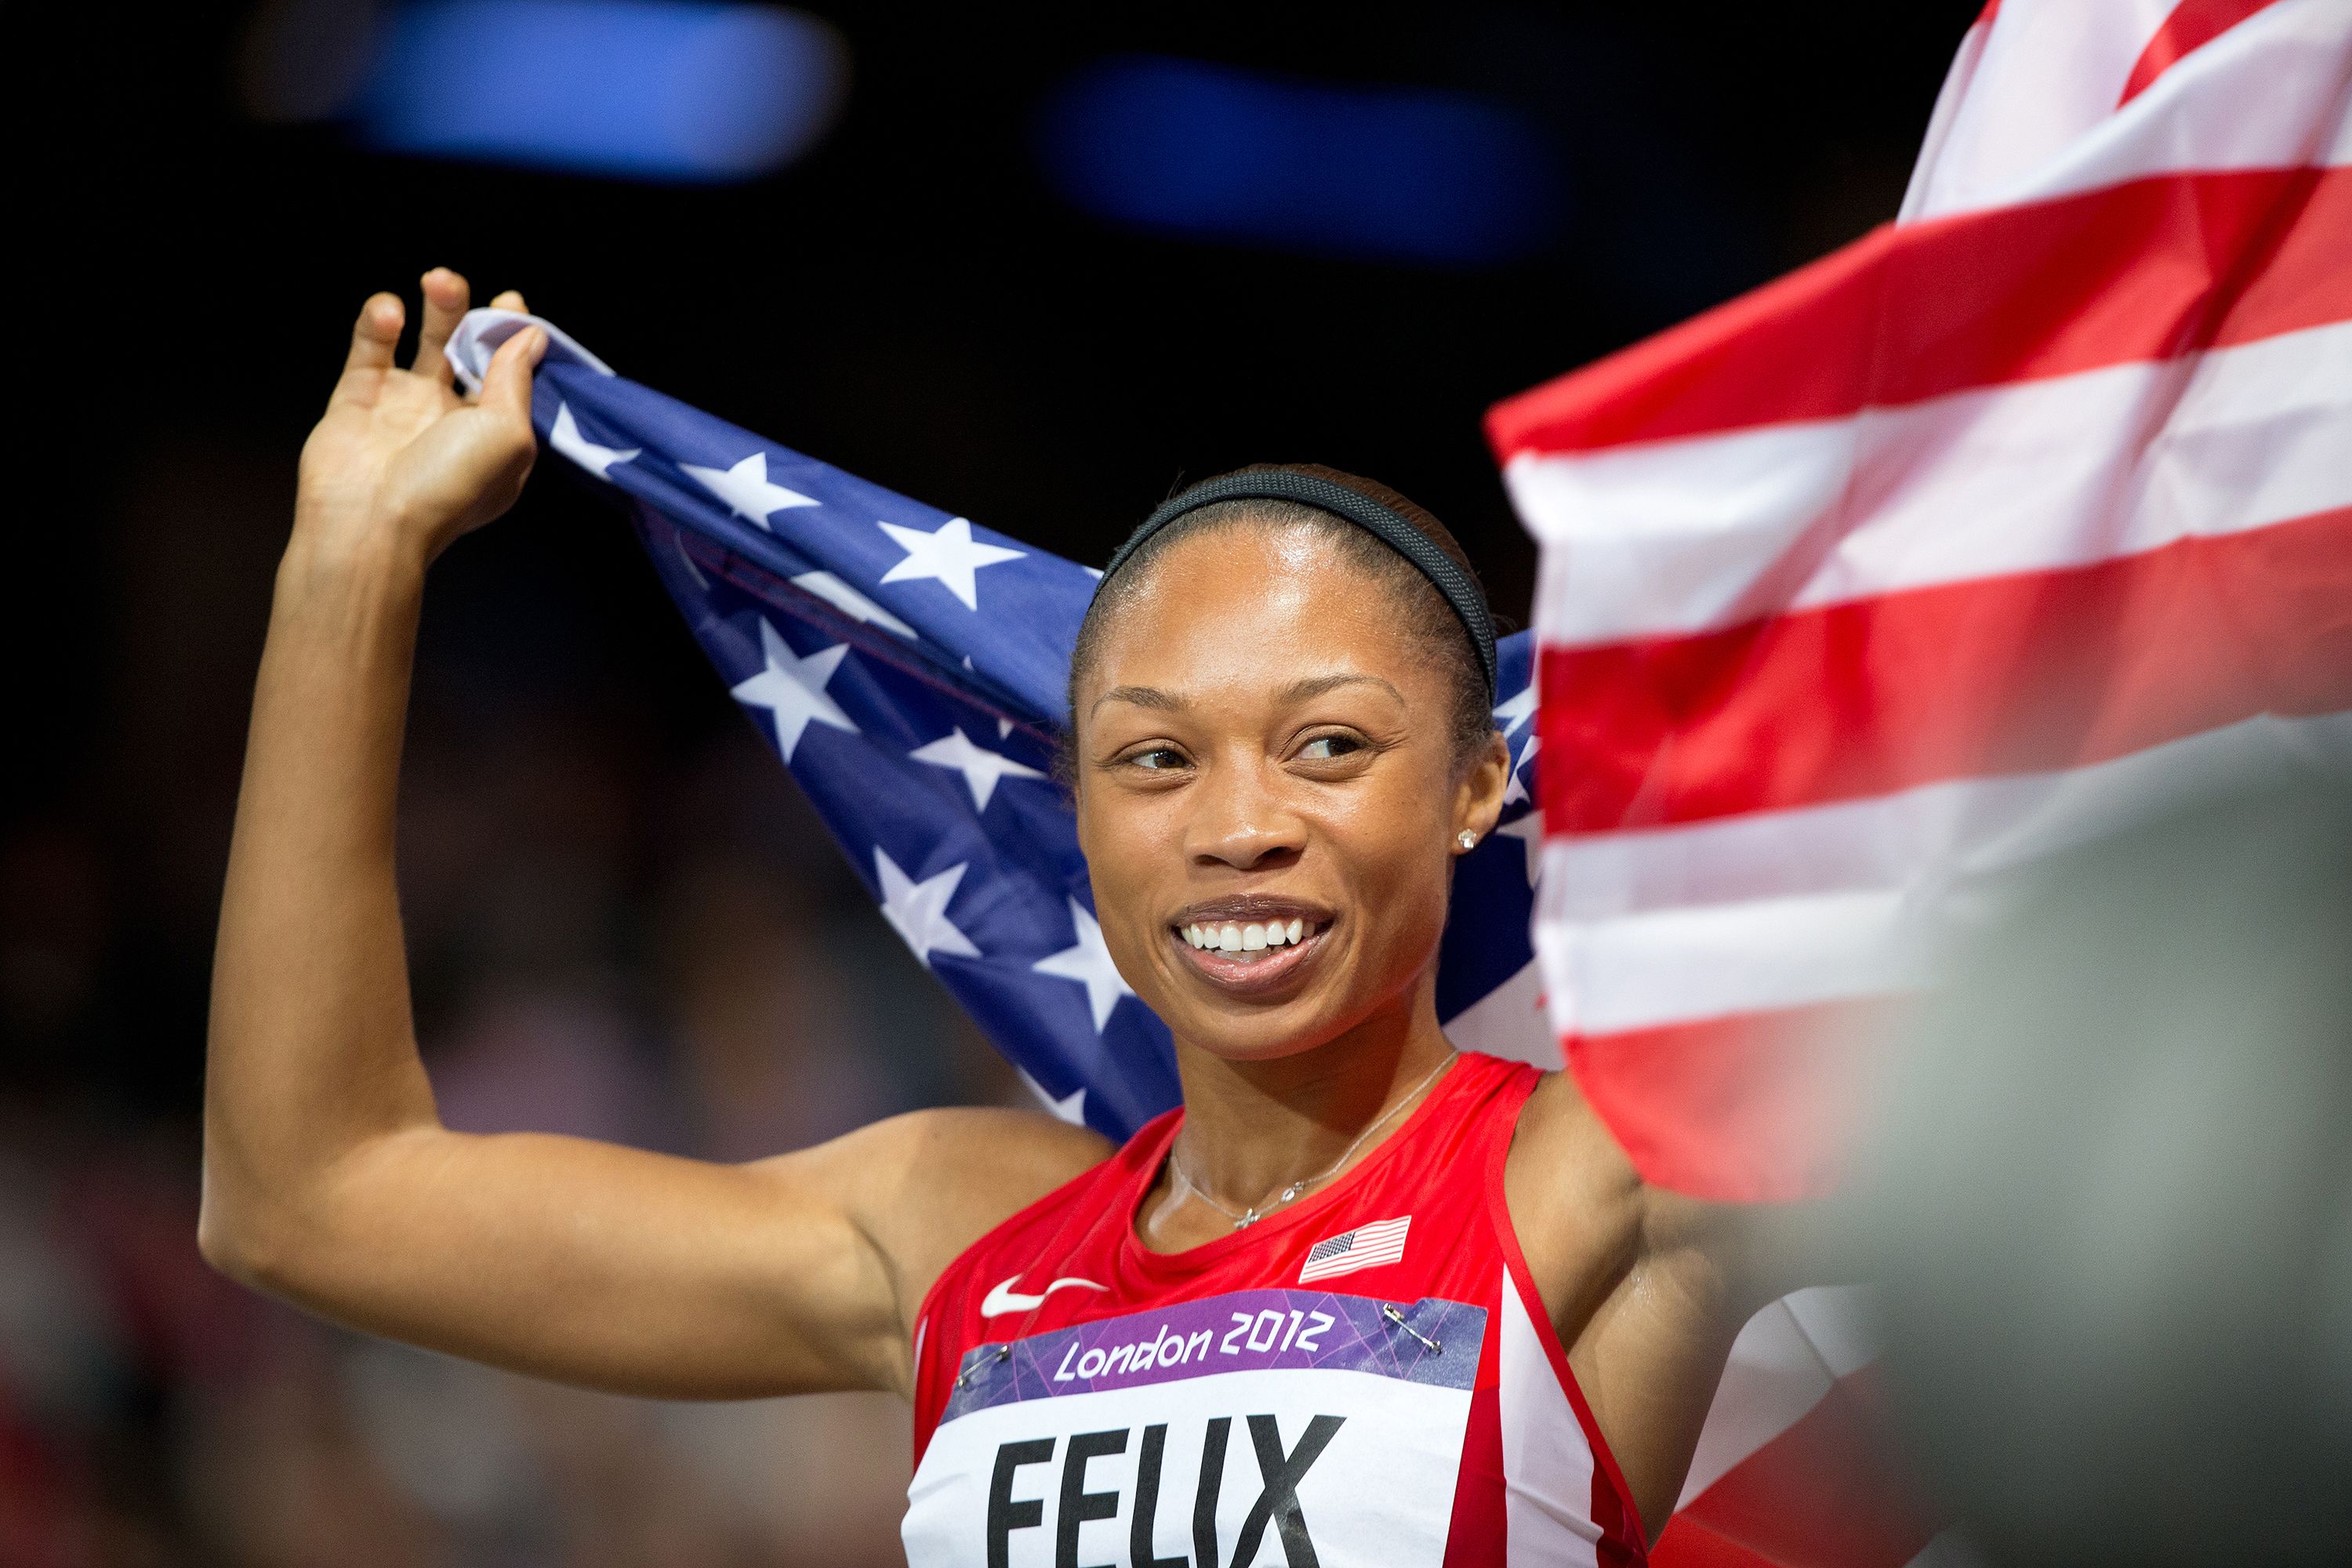 Olympic Sprinter Allyson Felix Is Partnering With Athleta to